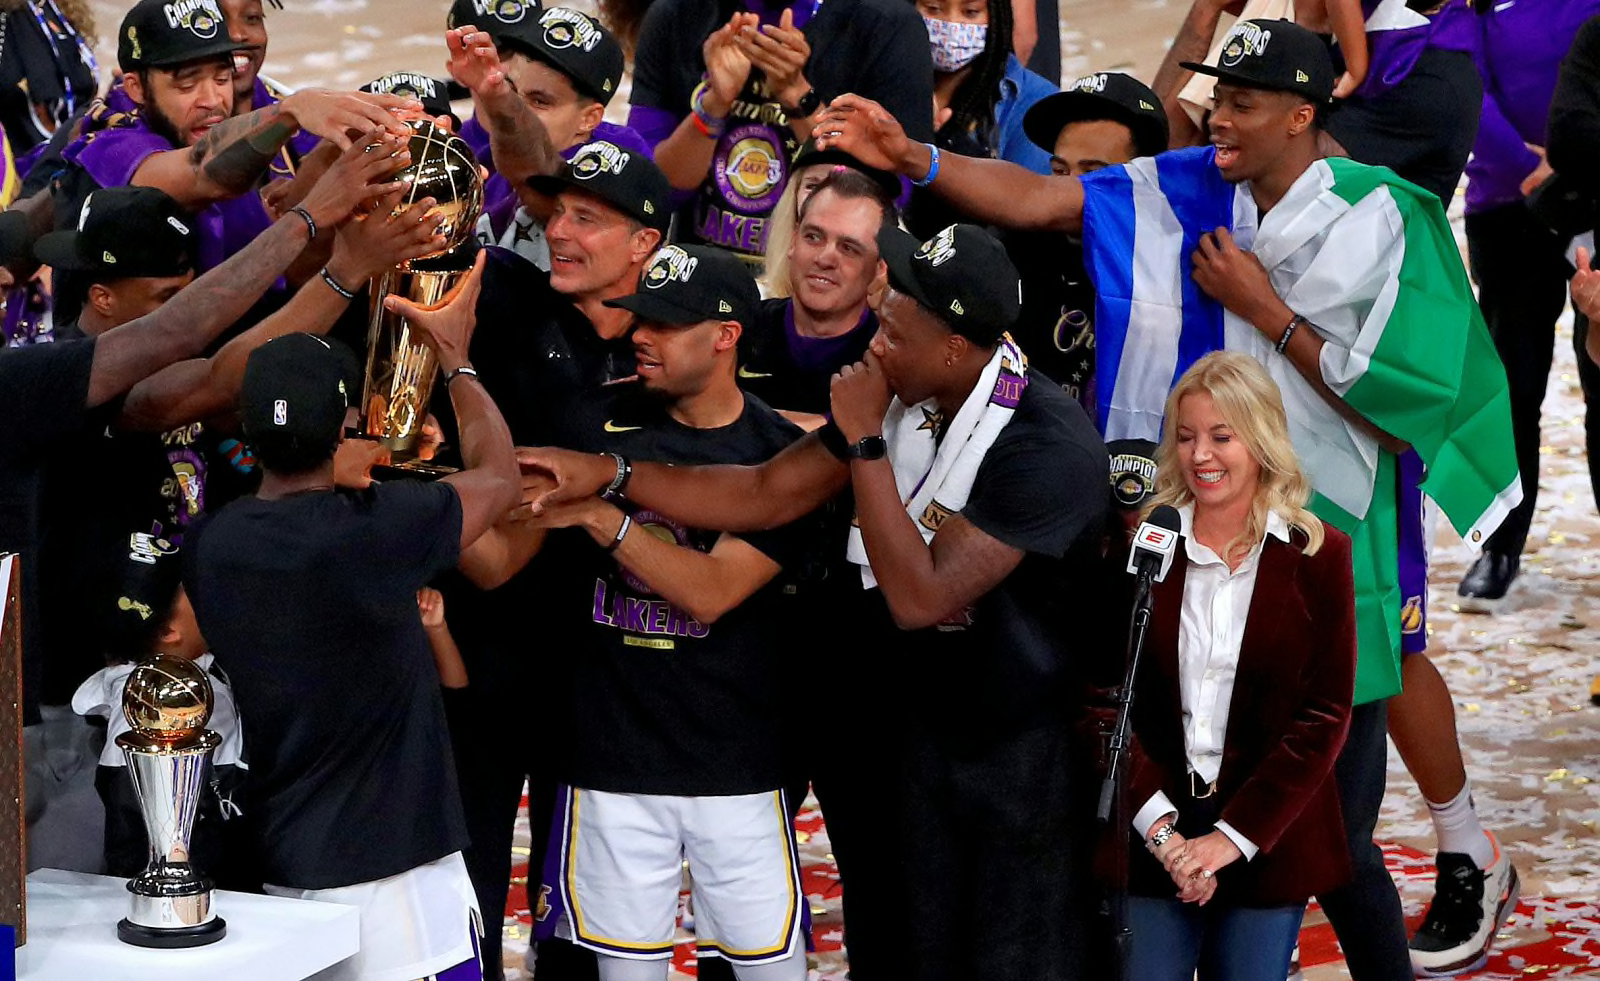 Lakers won the NBA championship. Will the Dodgers win the World